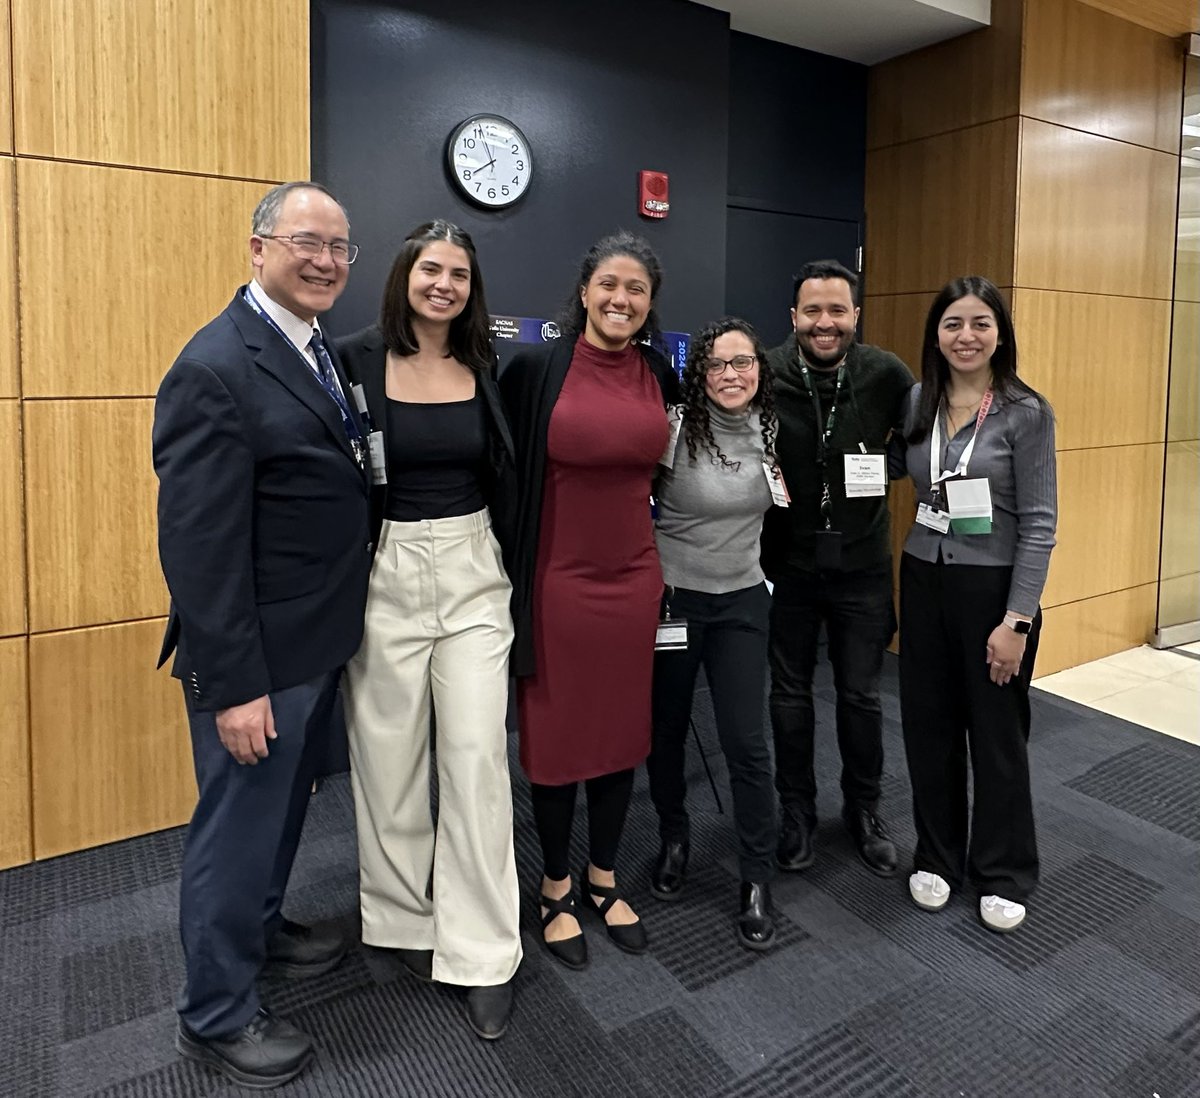 Thank you for making our second annual GSBS Student-Alumni Networking Event a success! We loved putting this event together with @TuftsSACNAS, @TuftsGwise, and @TuftsAlumni. Our guest speakers @JenNwankwo and #FrankSlack were wonderful!